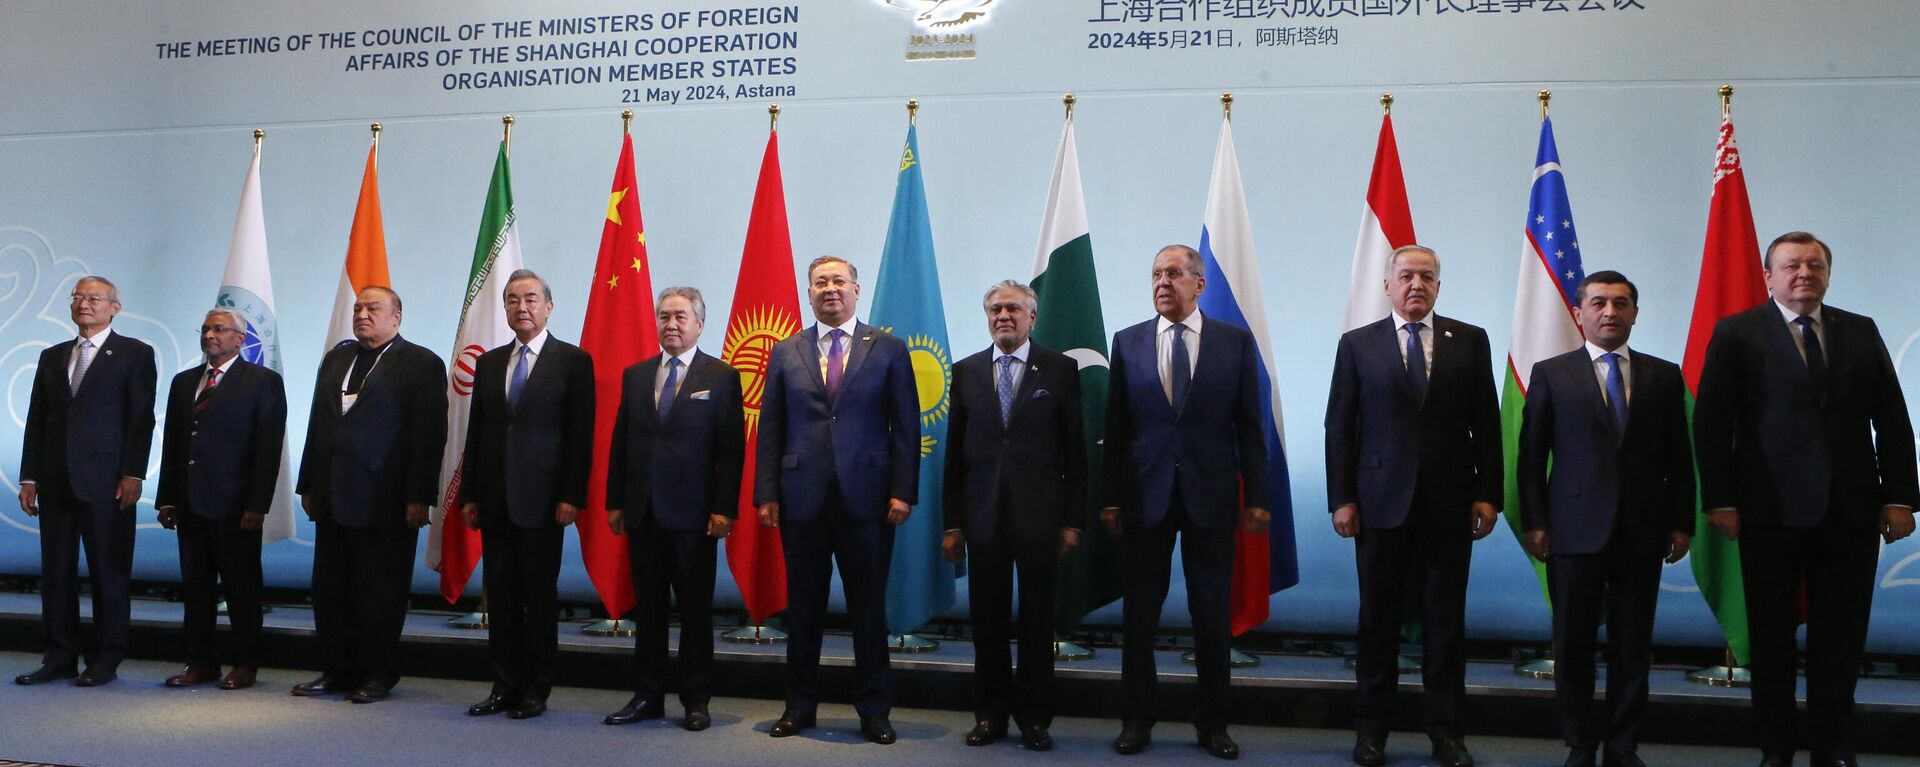 Foreign ministers of the Shanghai Cooperation Organisation (SCO) member states pose for a family photo prior to their meeting in Astana on May 21, 2024. (Photo by STRINGER / AFP)  - Sputnik India, 1920, 21.06.2024